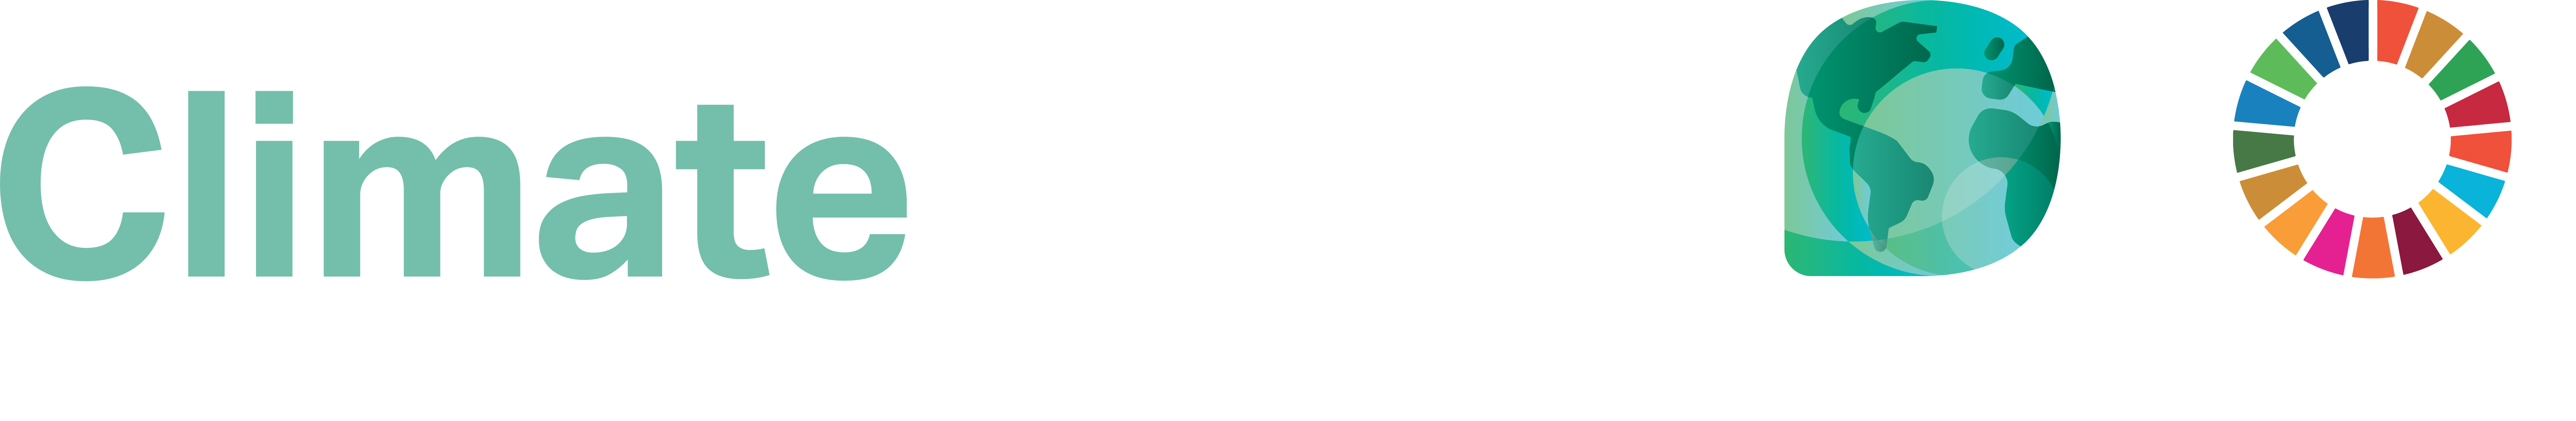 Climate Action logo with SDGs